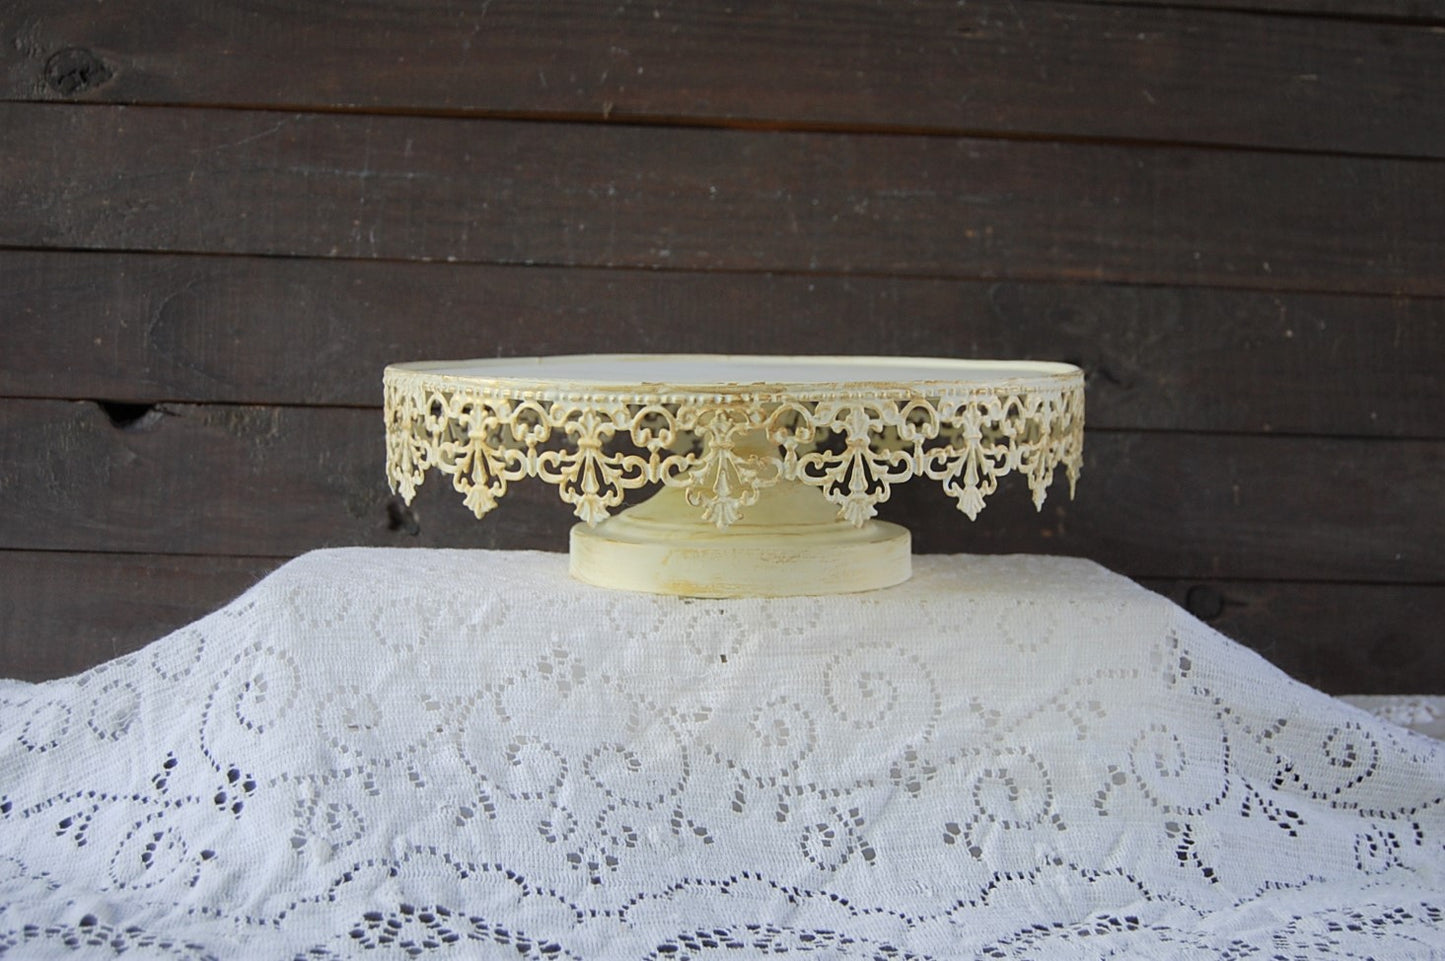 Ivory & gold cake stand - The Vintage Artistry